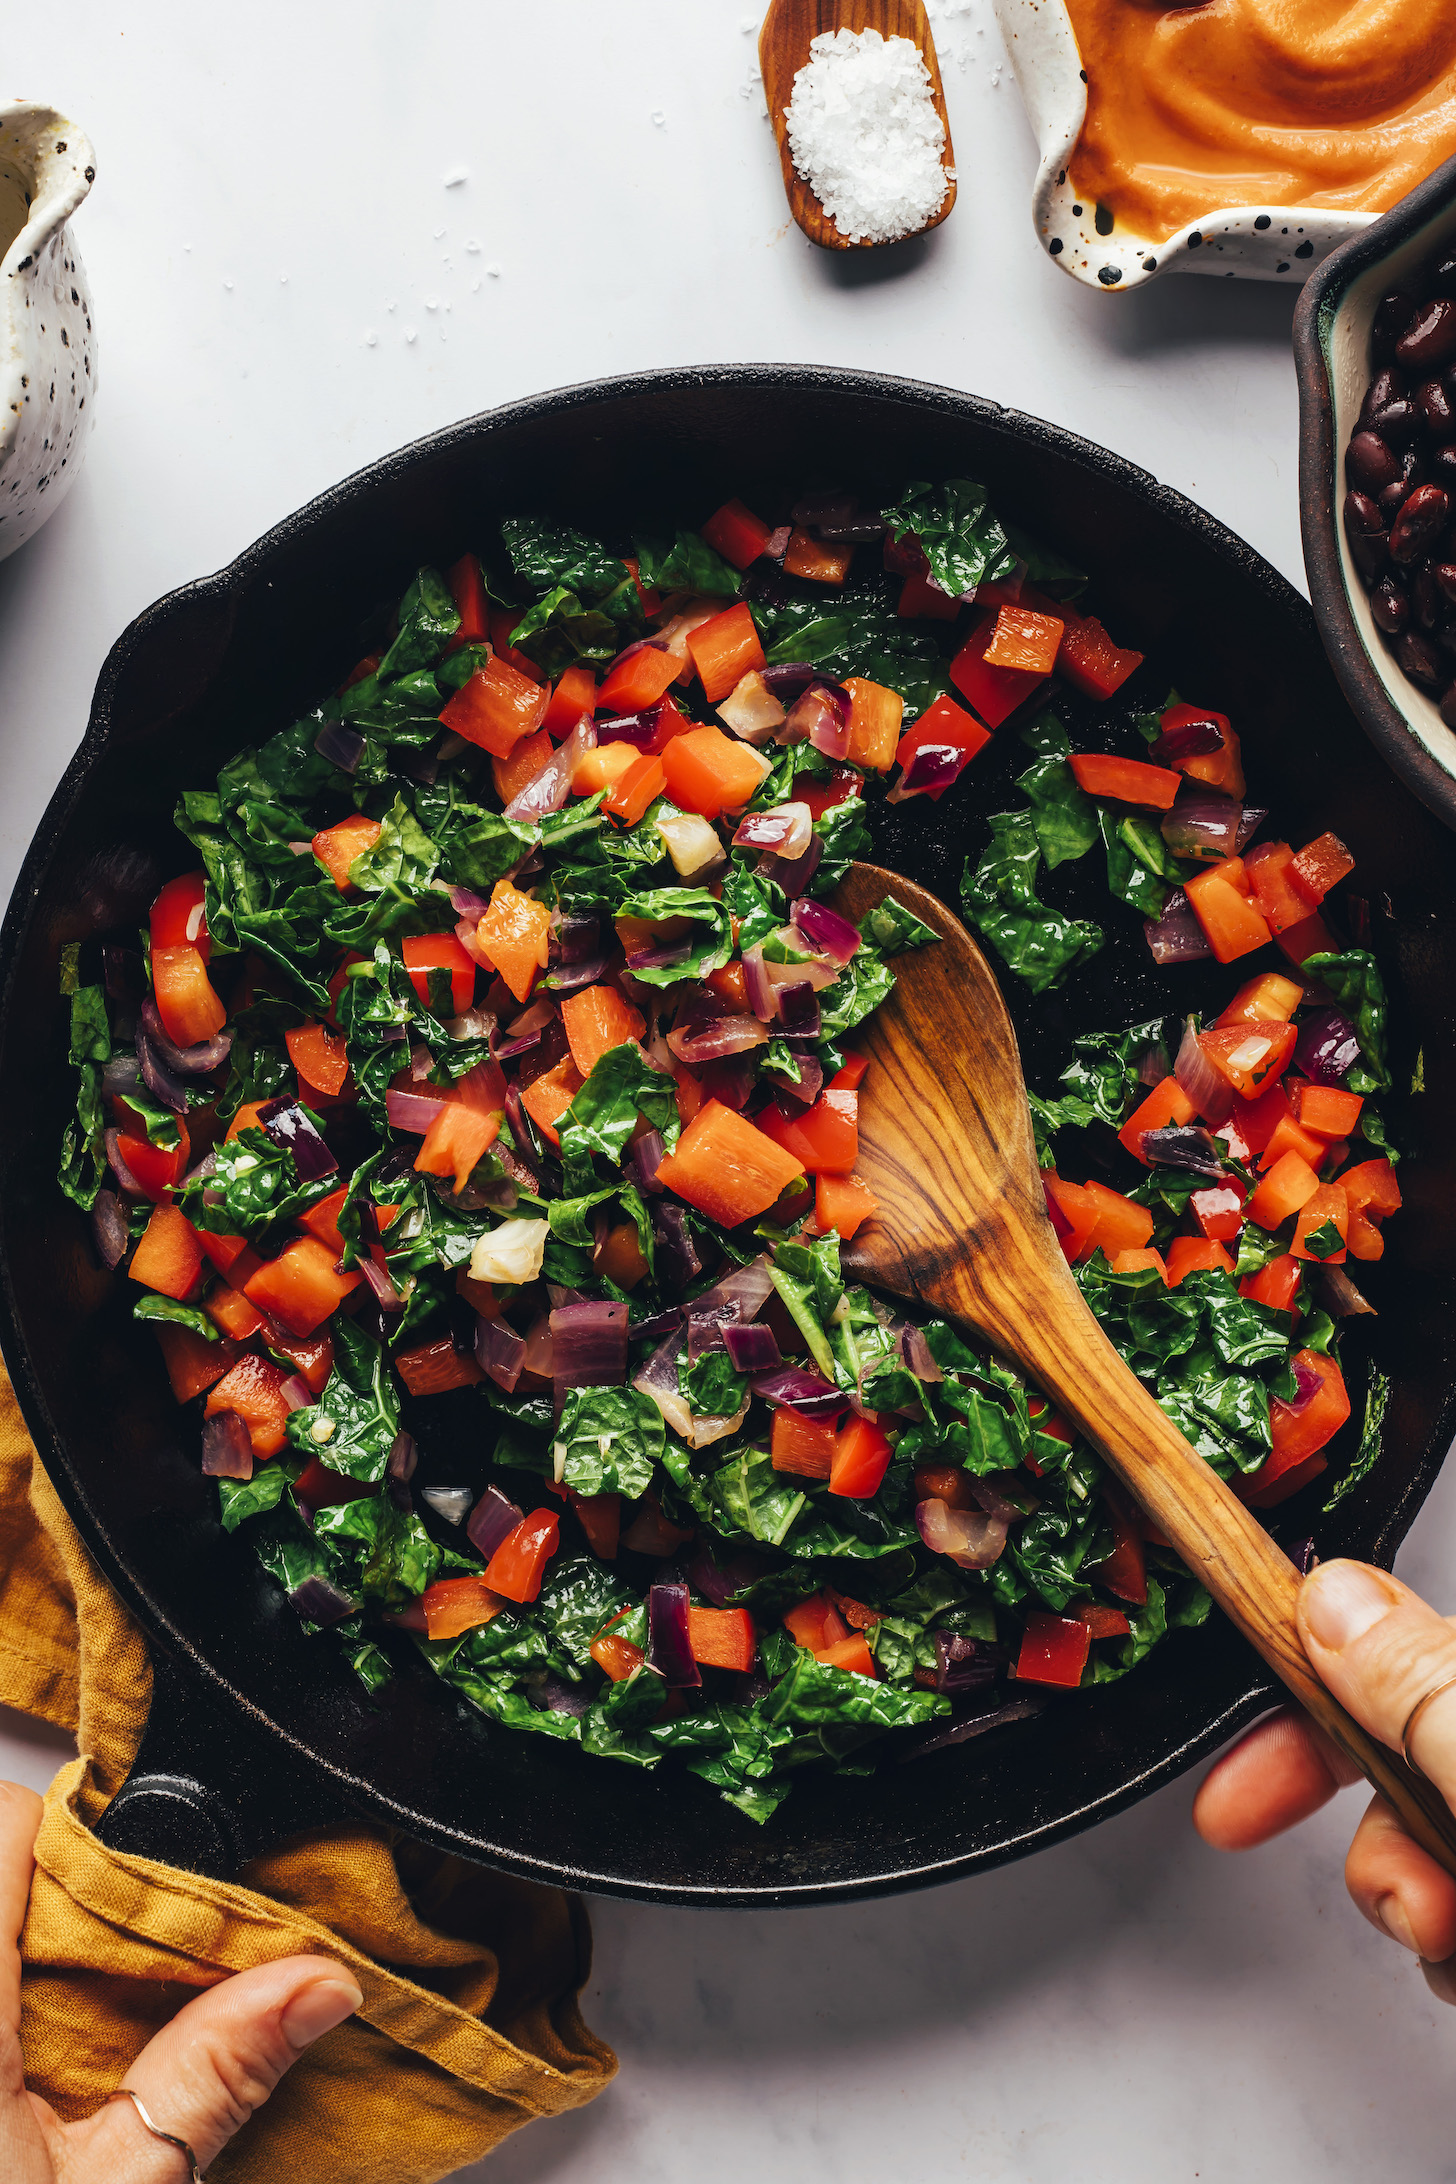 Sautéing onion, bell pepper, and kale in a cast iron skillet